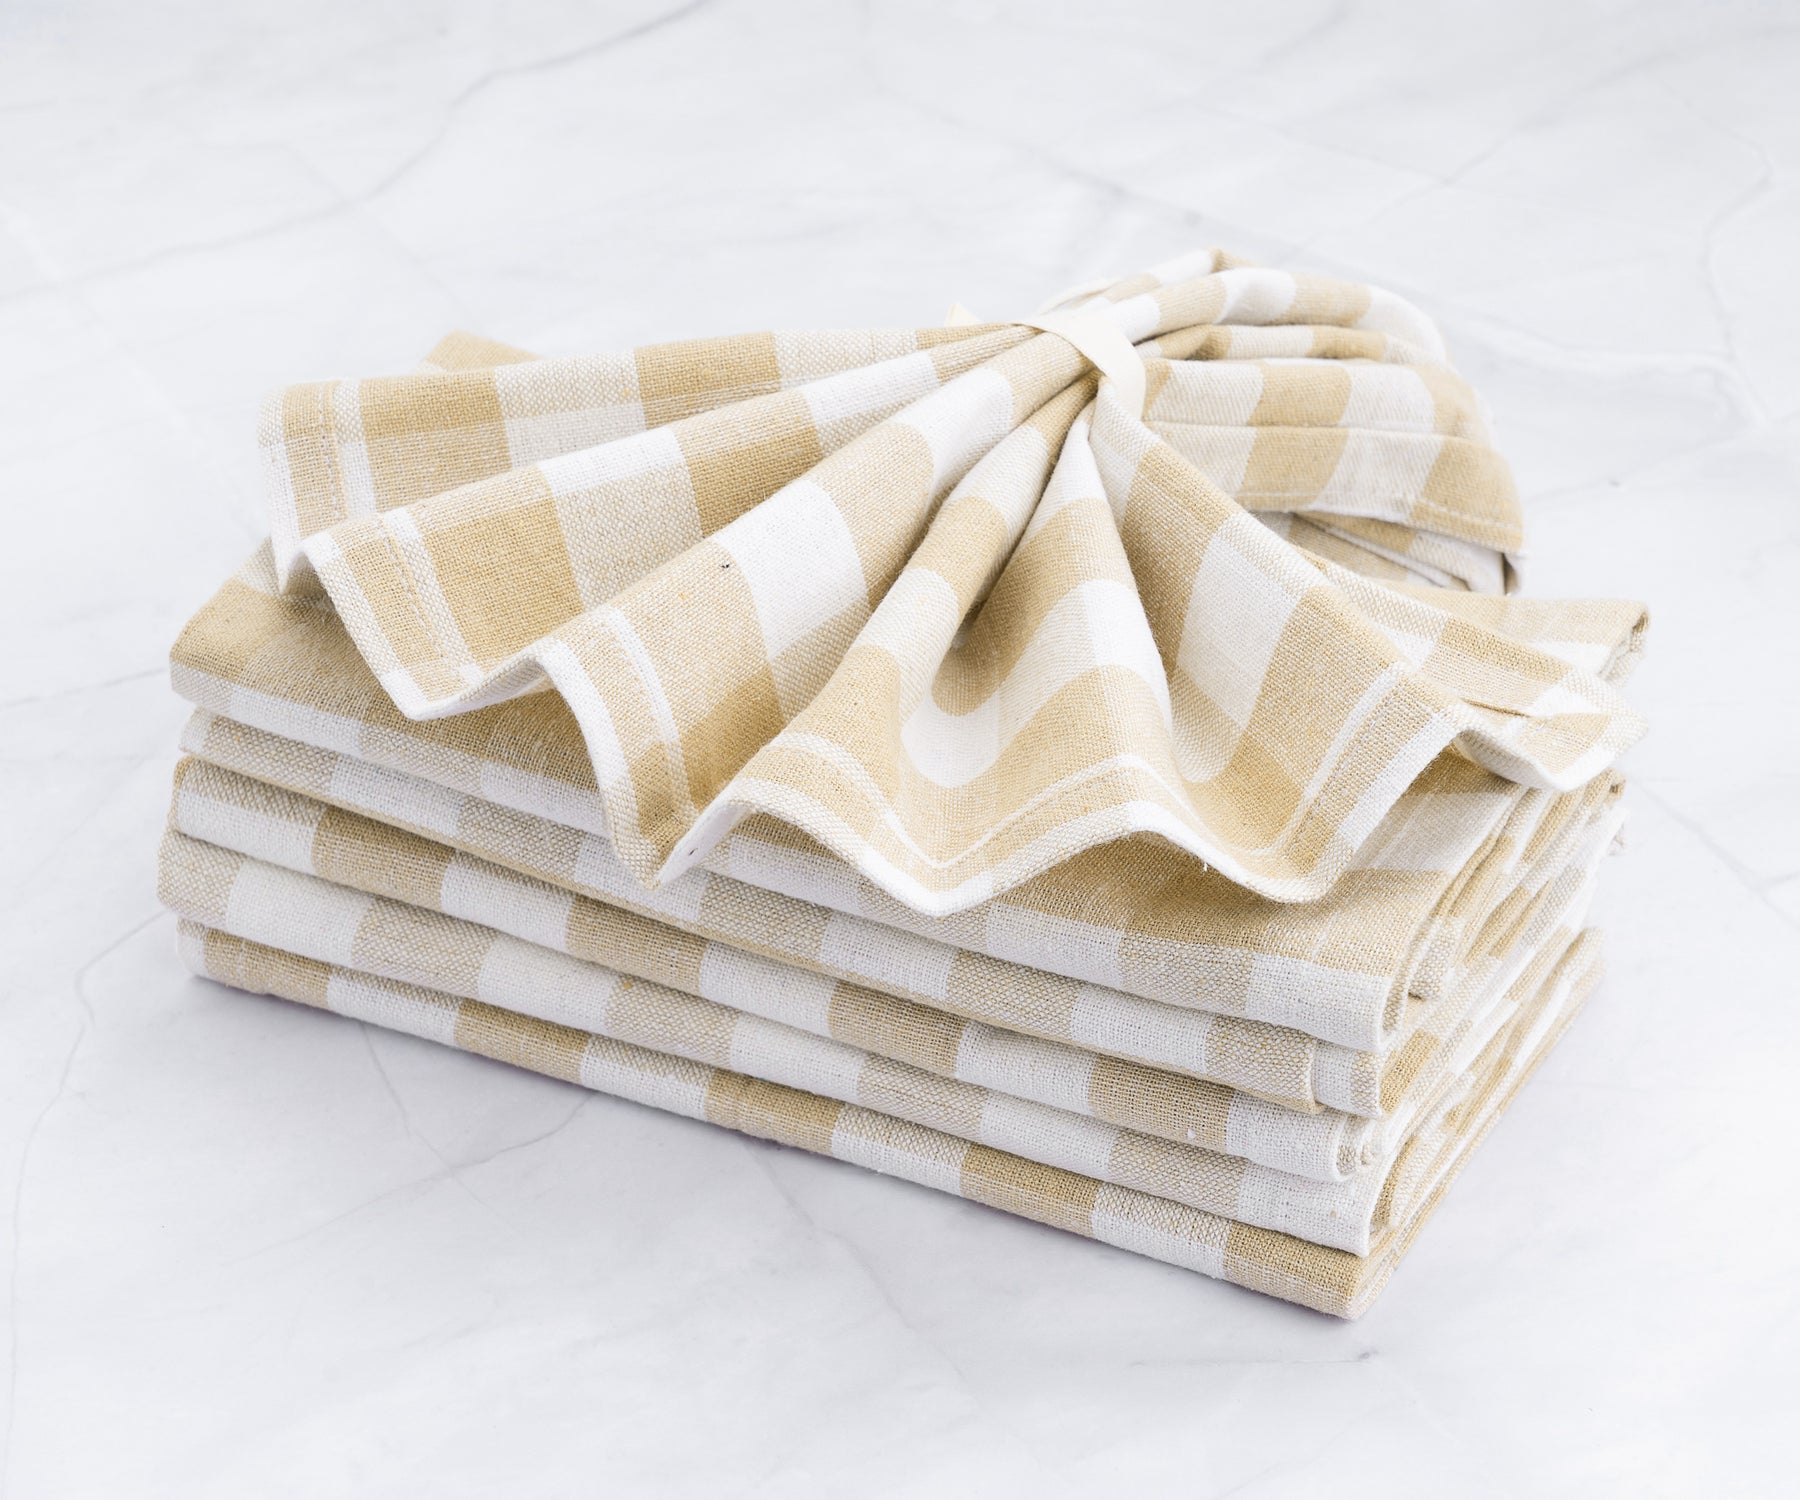 Buffalo check napkins for a cozy and inviting dining atmosphere.